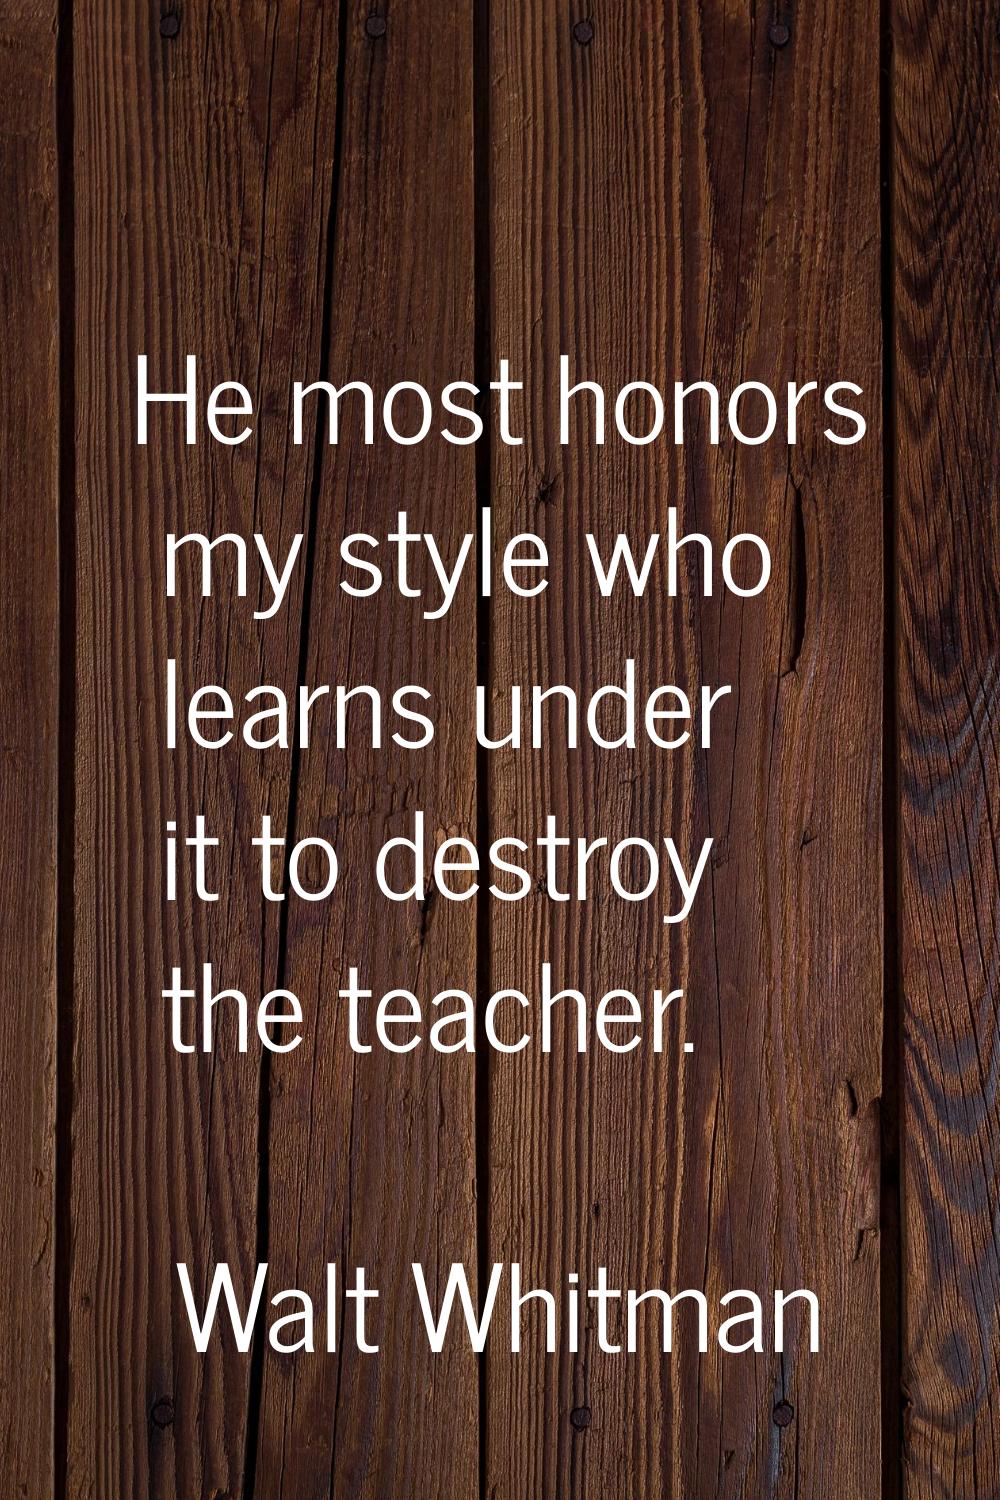 He most honors my style who learns under it to destroy the teacher.